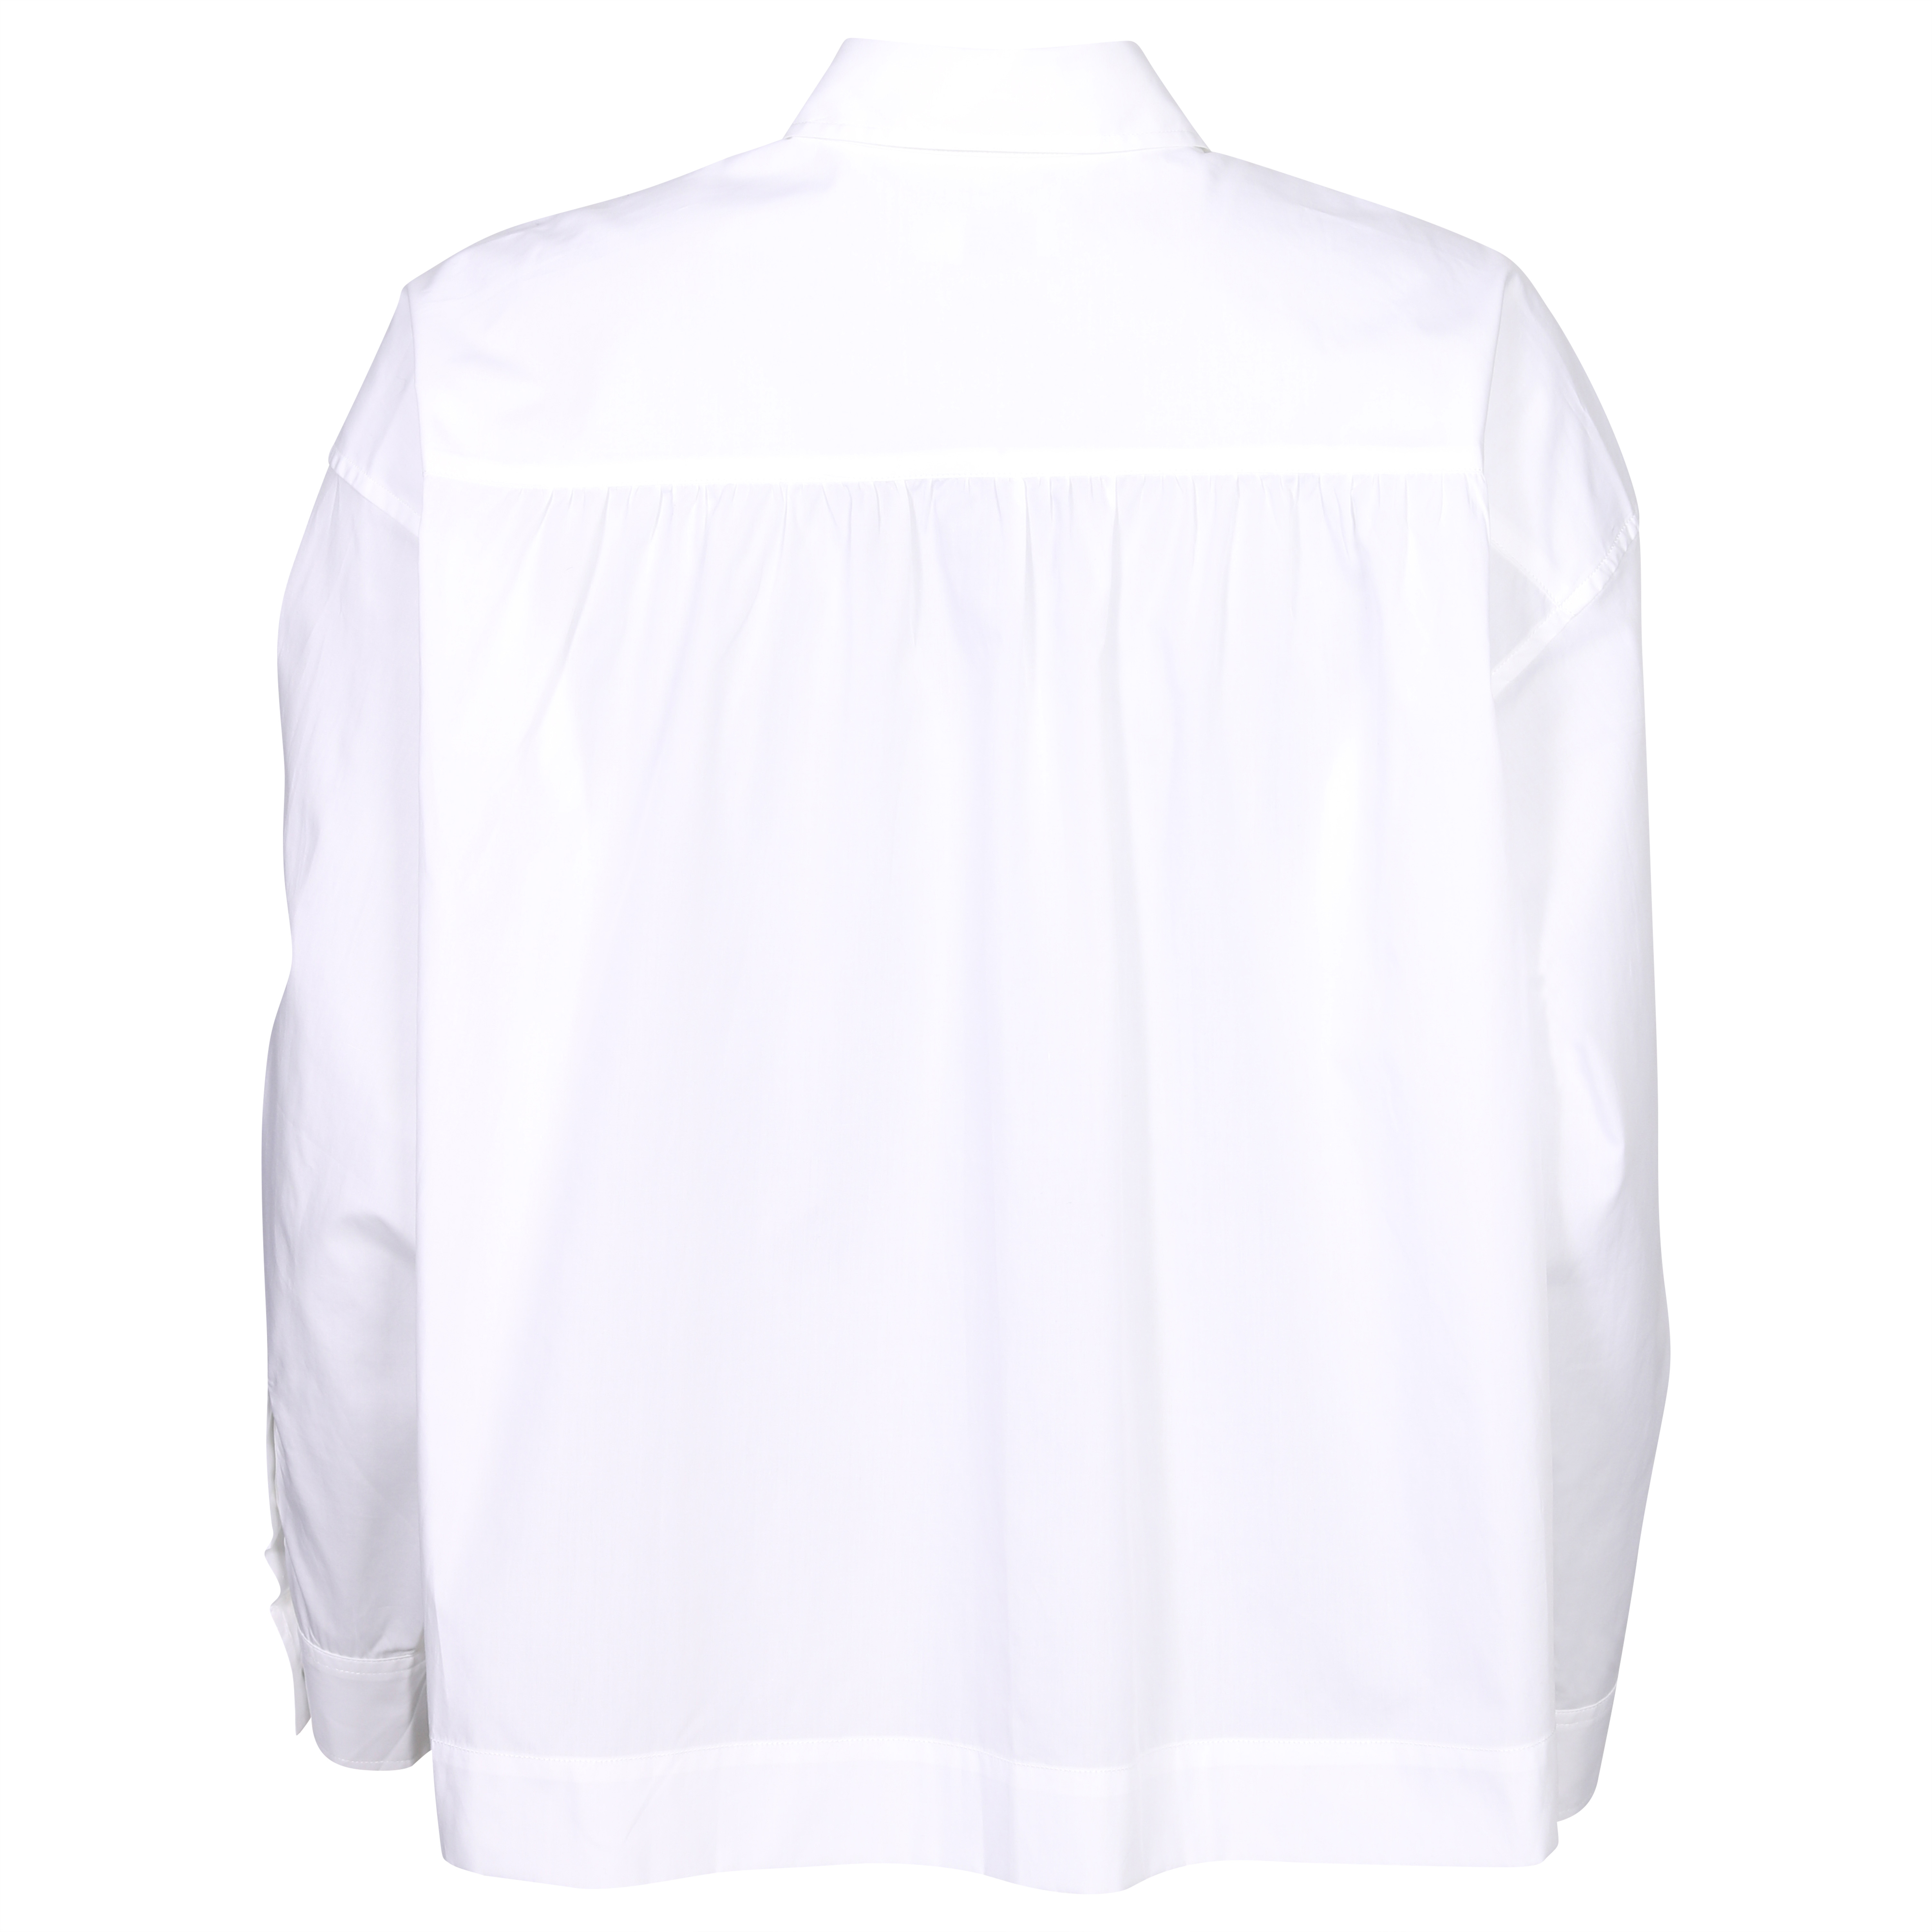 Closed Gathered Shirt in White S